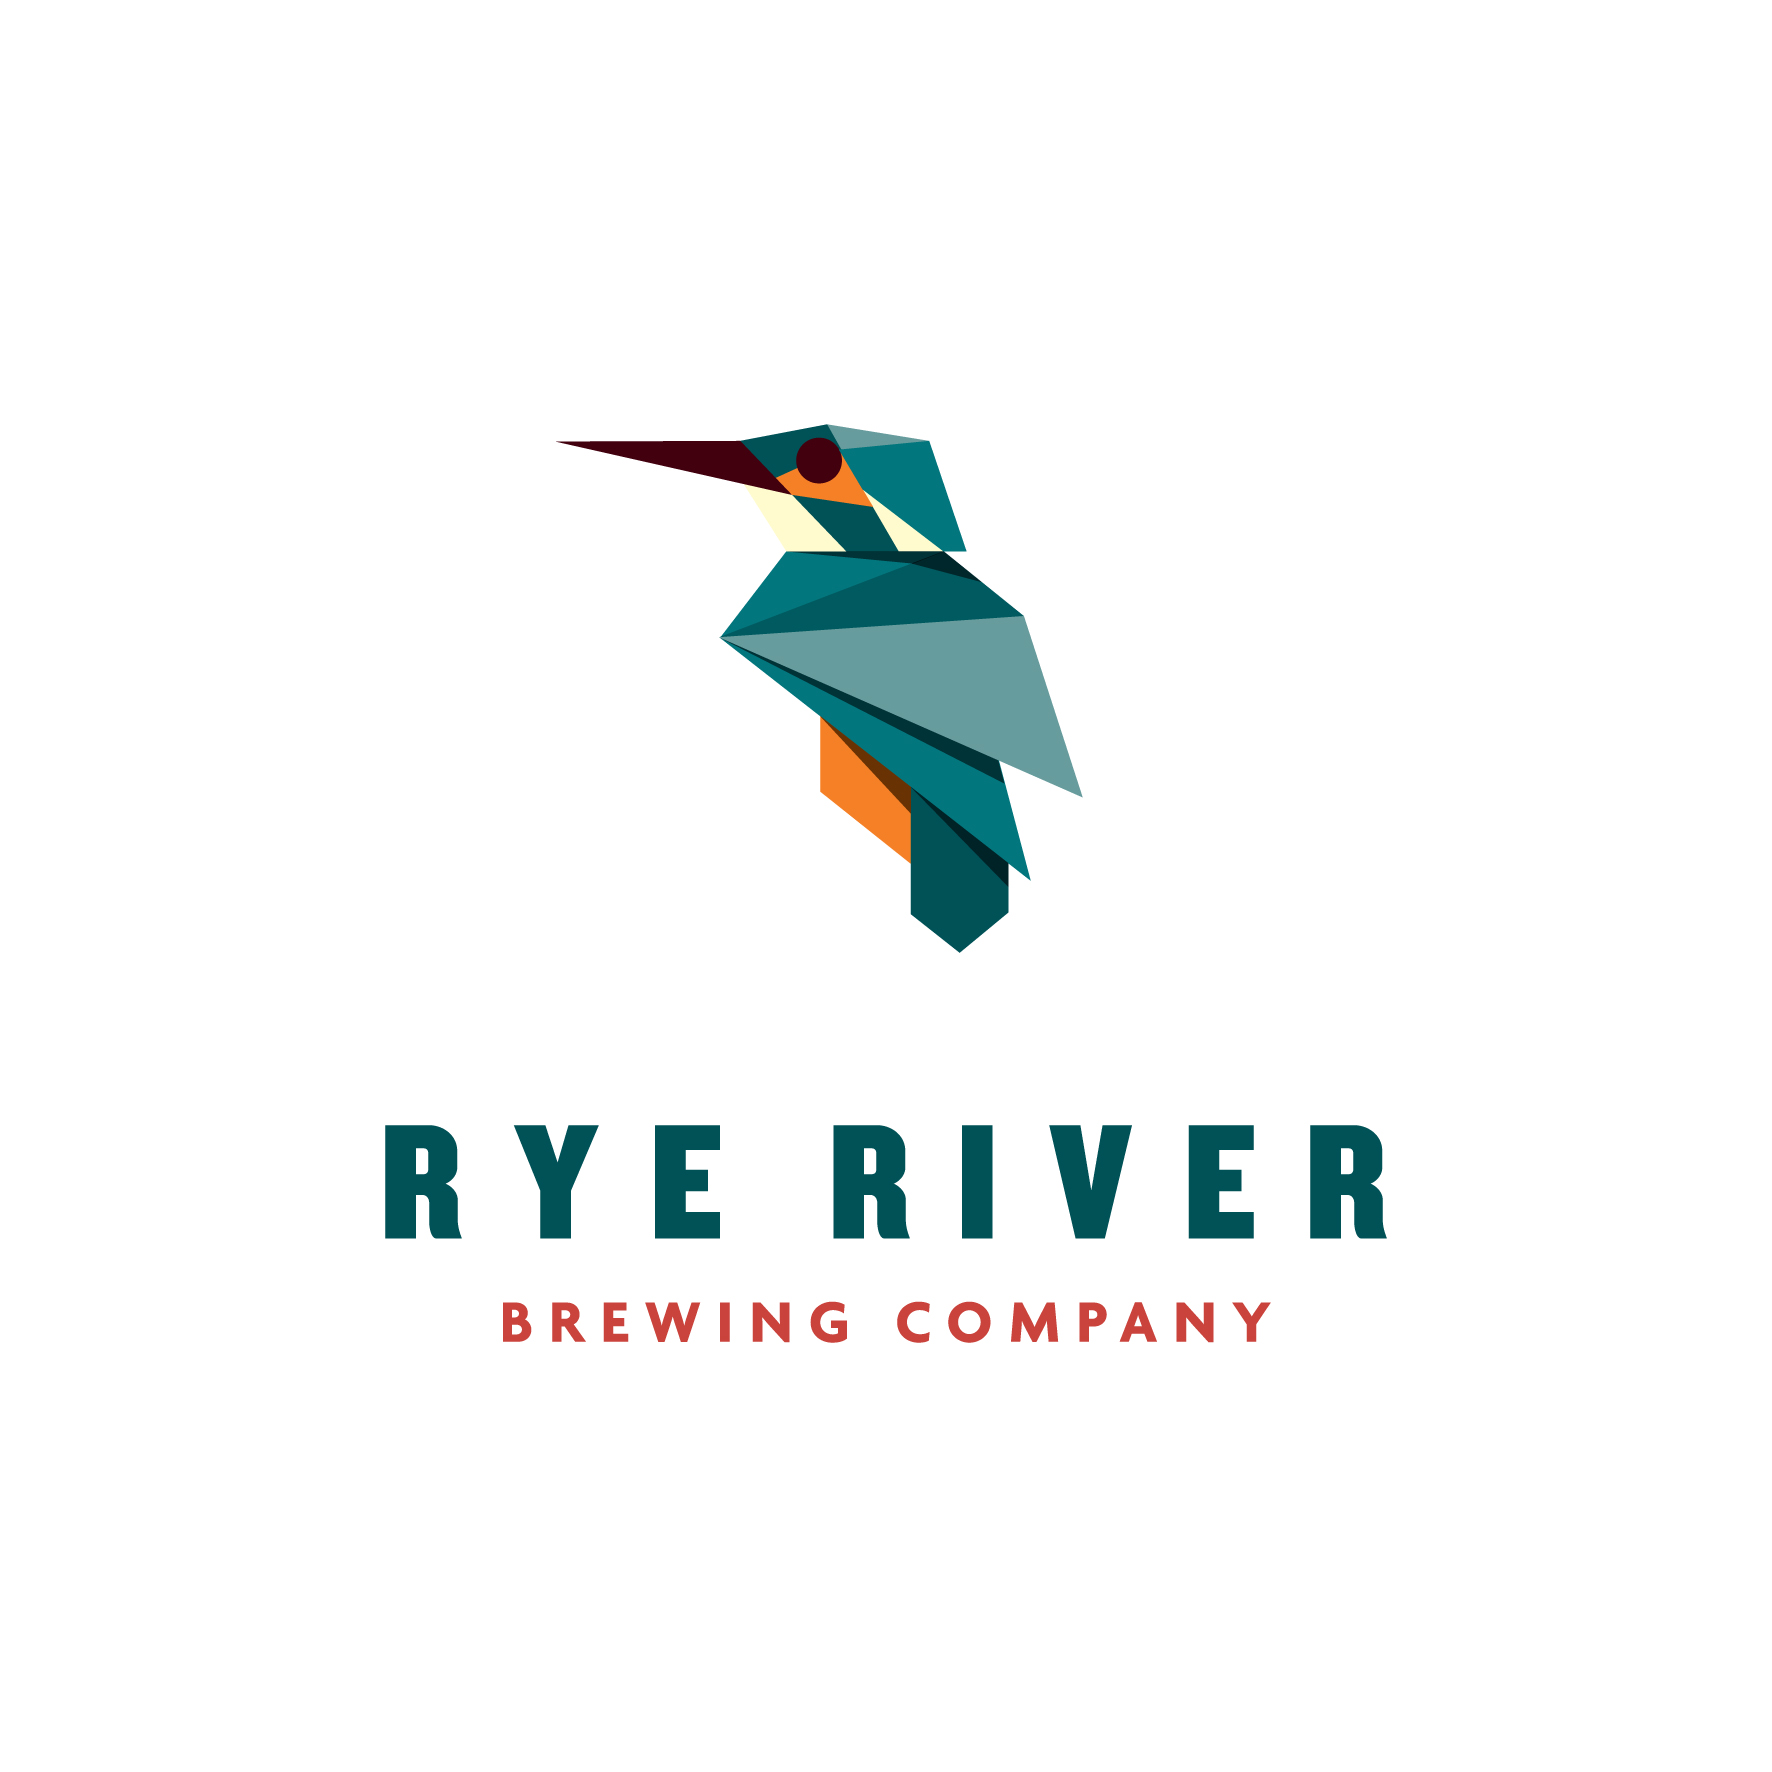 Rye River's move to a more polished brand look and approach demonstrates confidence in the business and the sector.